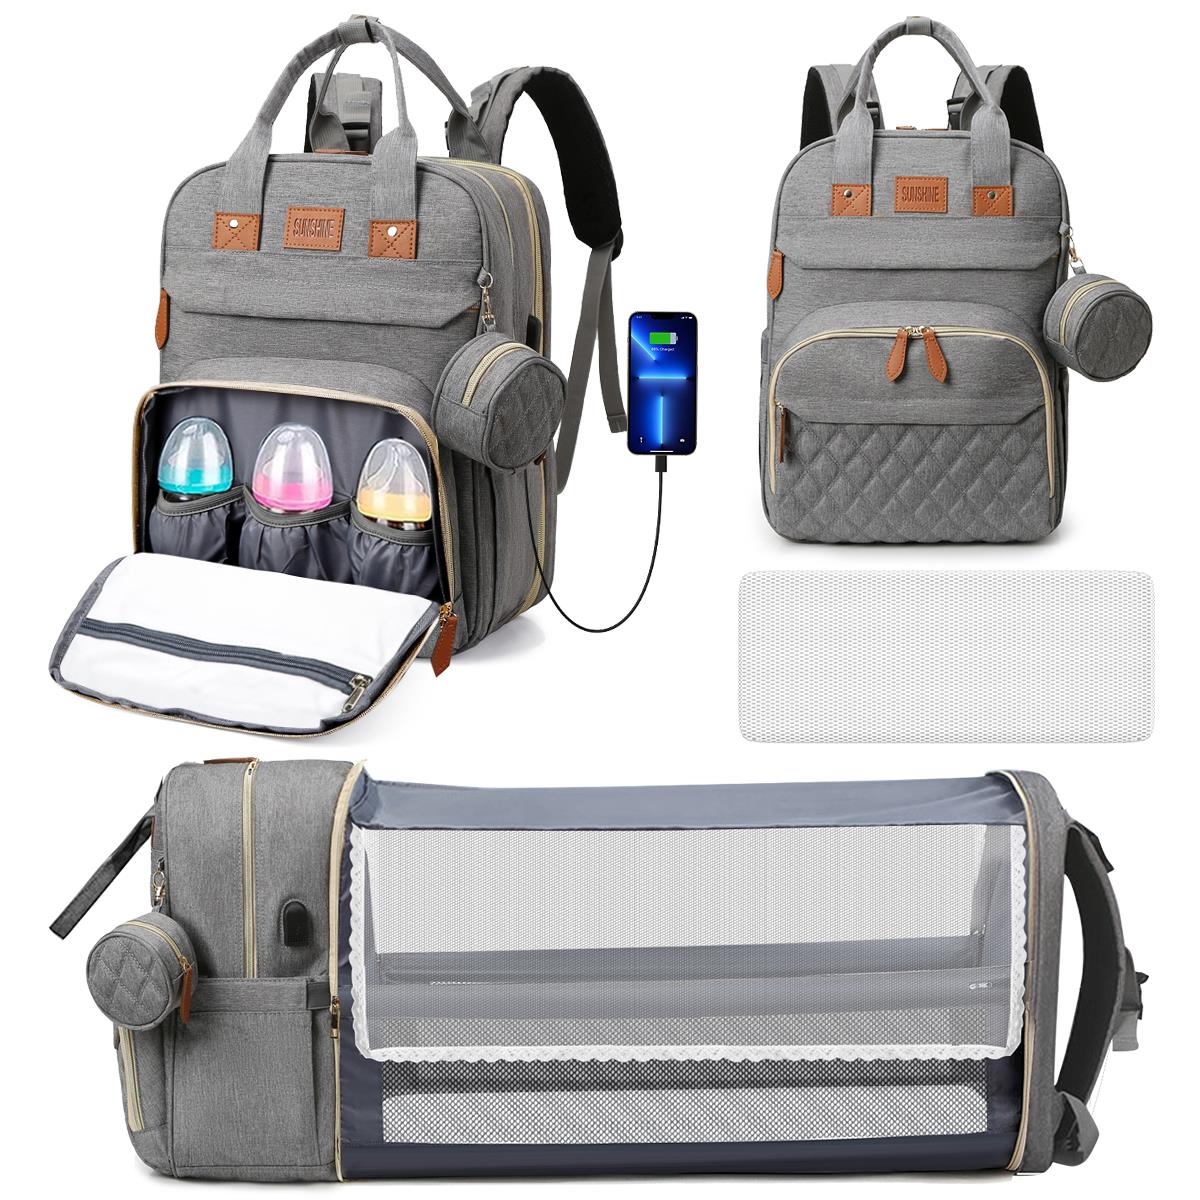 Diaper Bag Backpack, Multifunction Diaper Bag Backpack With Changing Station